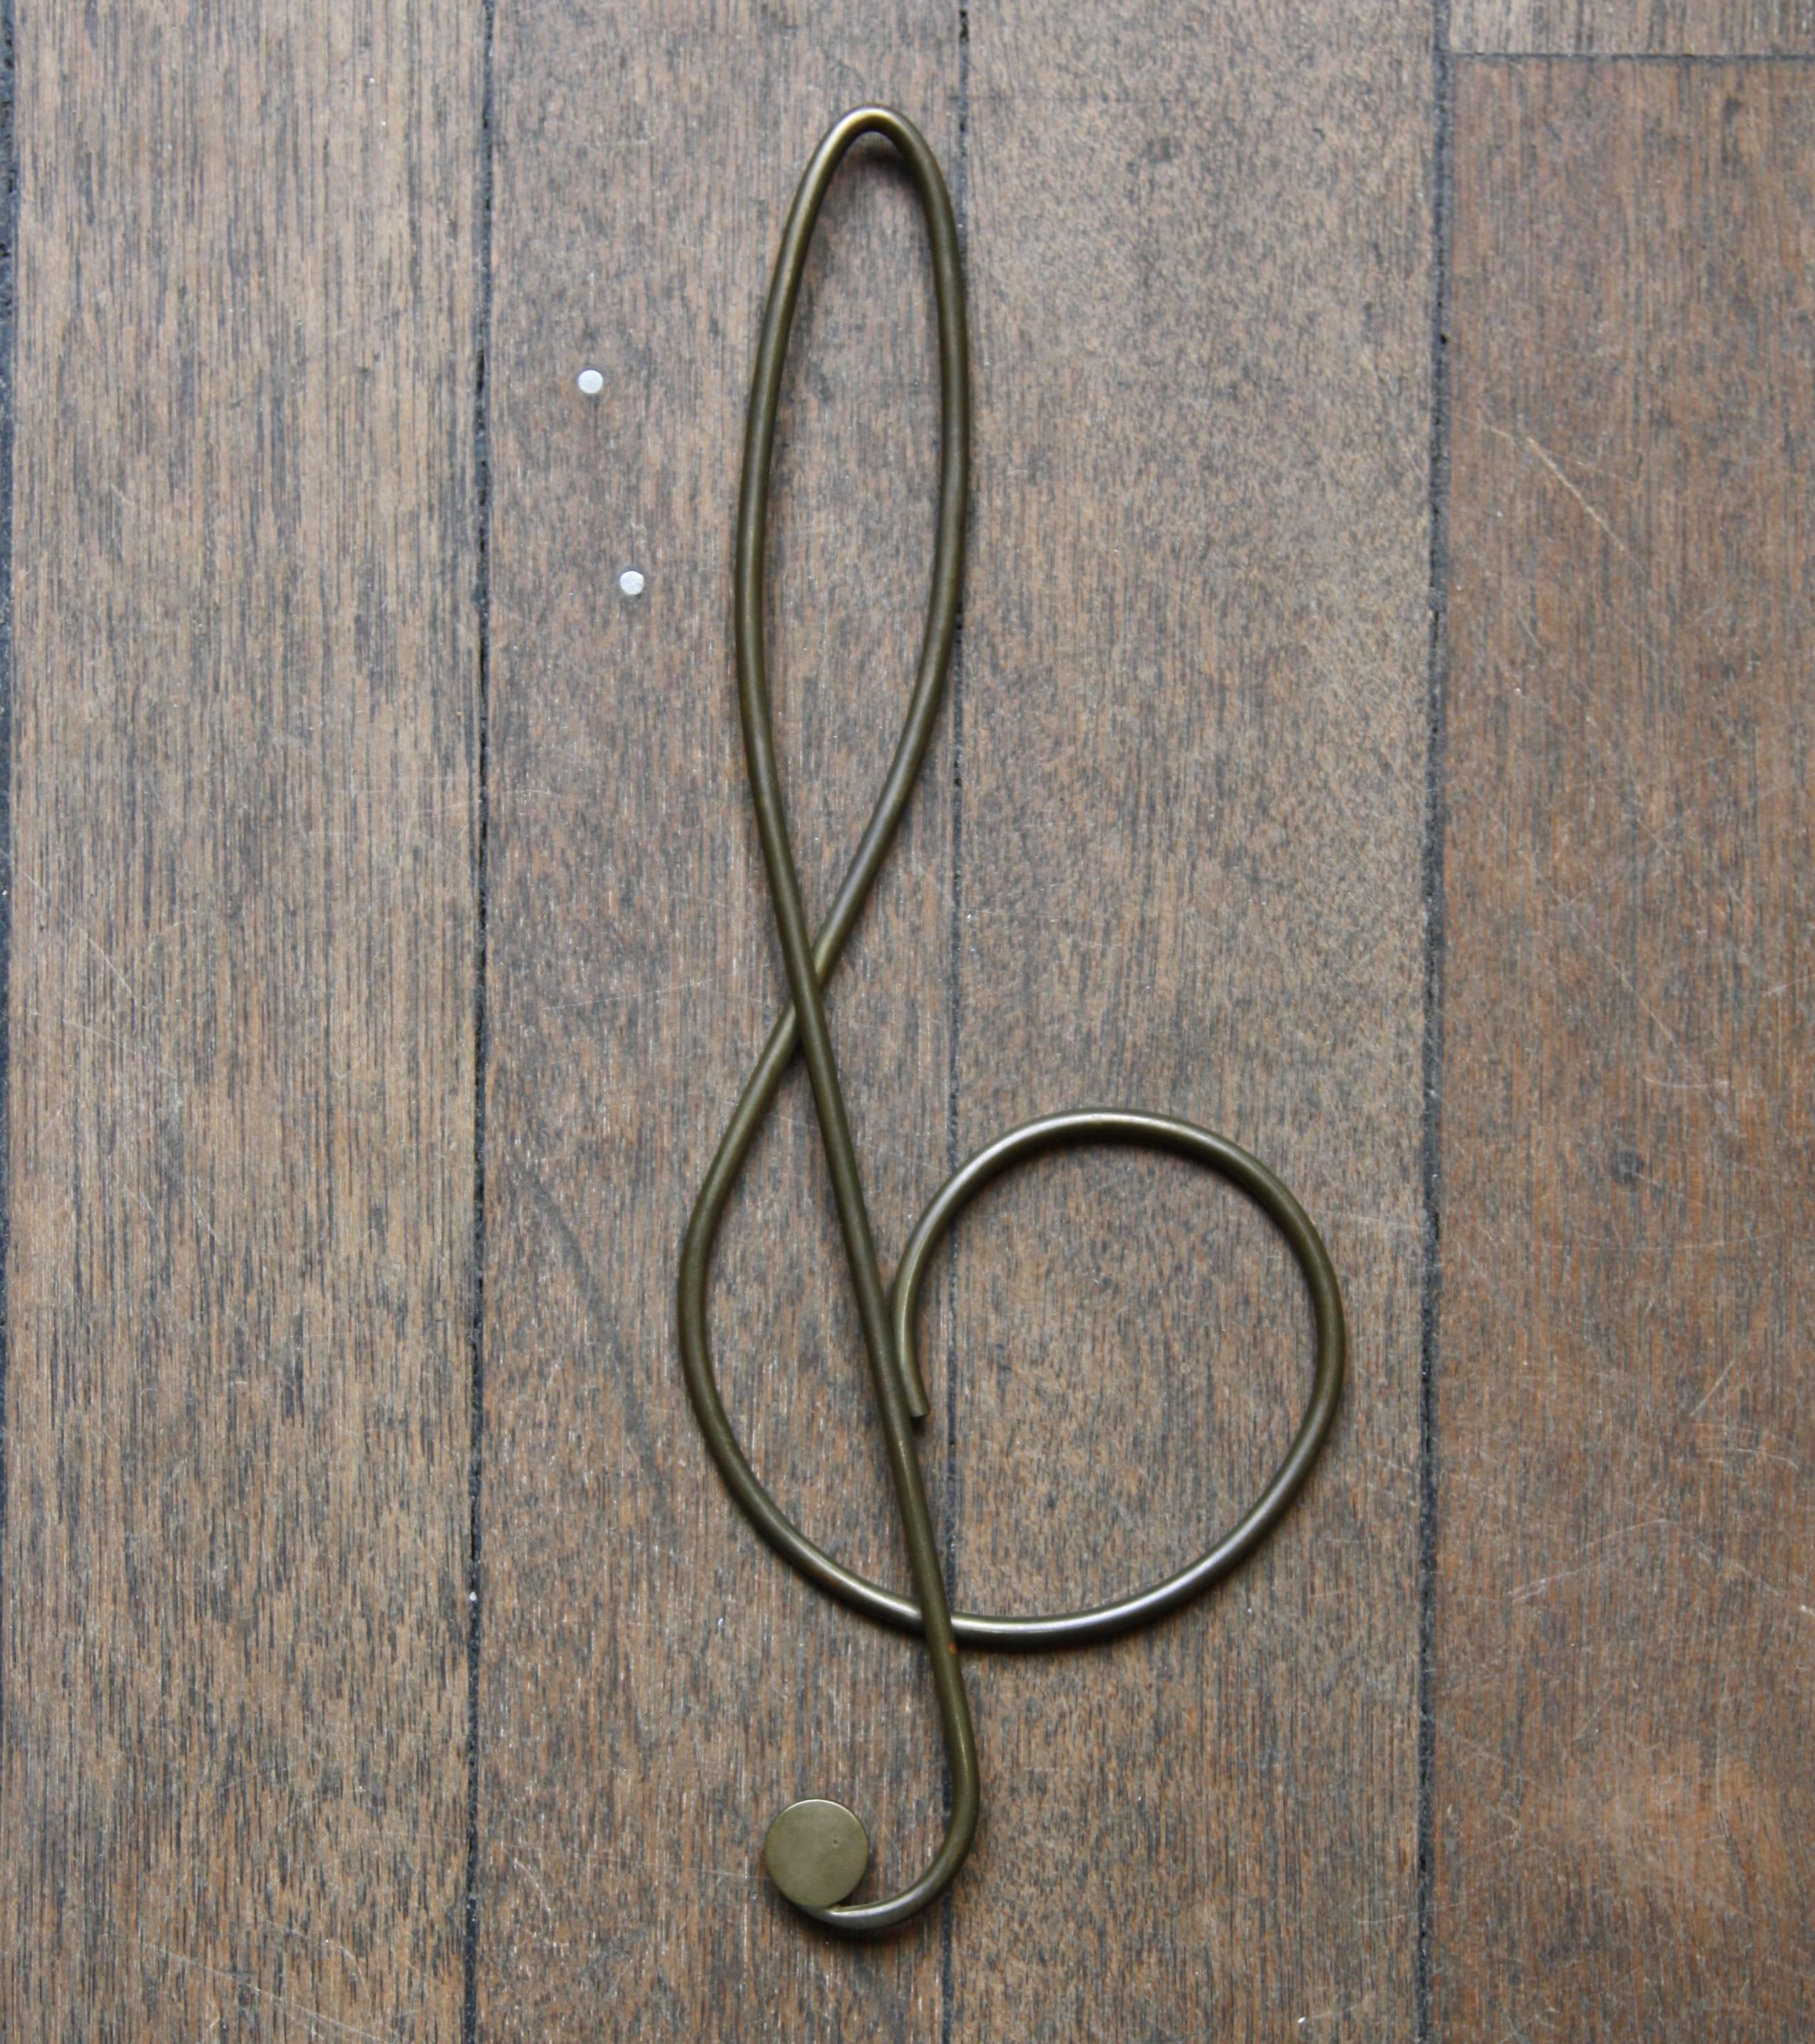 An oversized solid brass paper clip in the shape of a treble clef designed and made by Carl Auböck II, in Vienna, Austria, circa 1950.
Designed to keep documents in order the clip is formed of a continuous brass wire which overlaps in the middle to